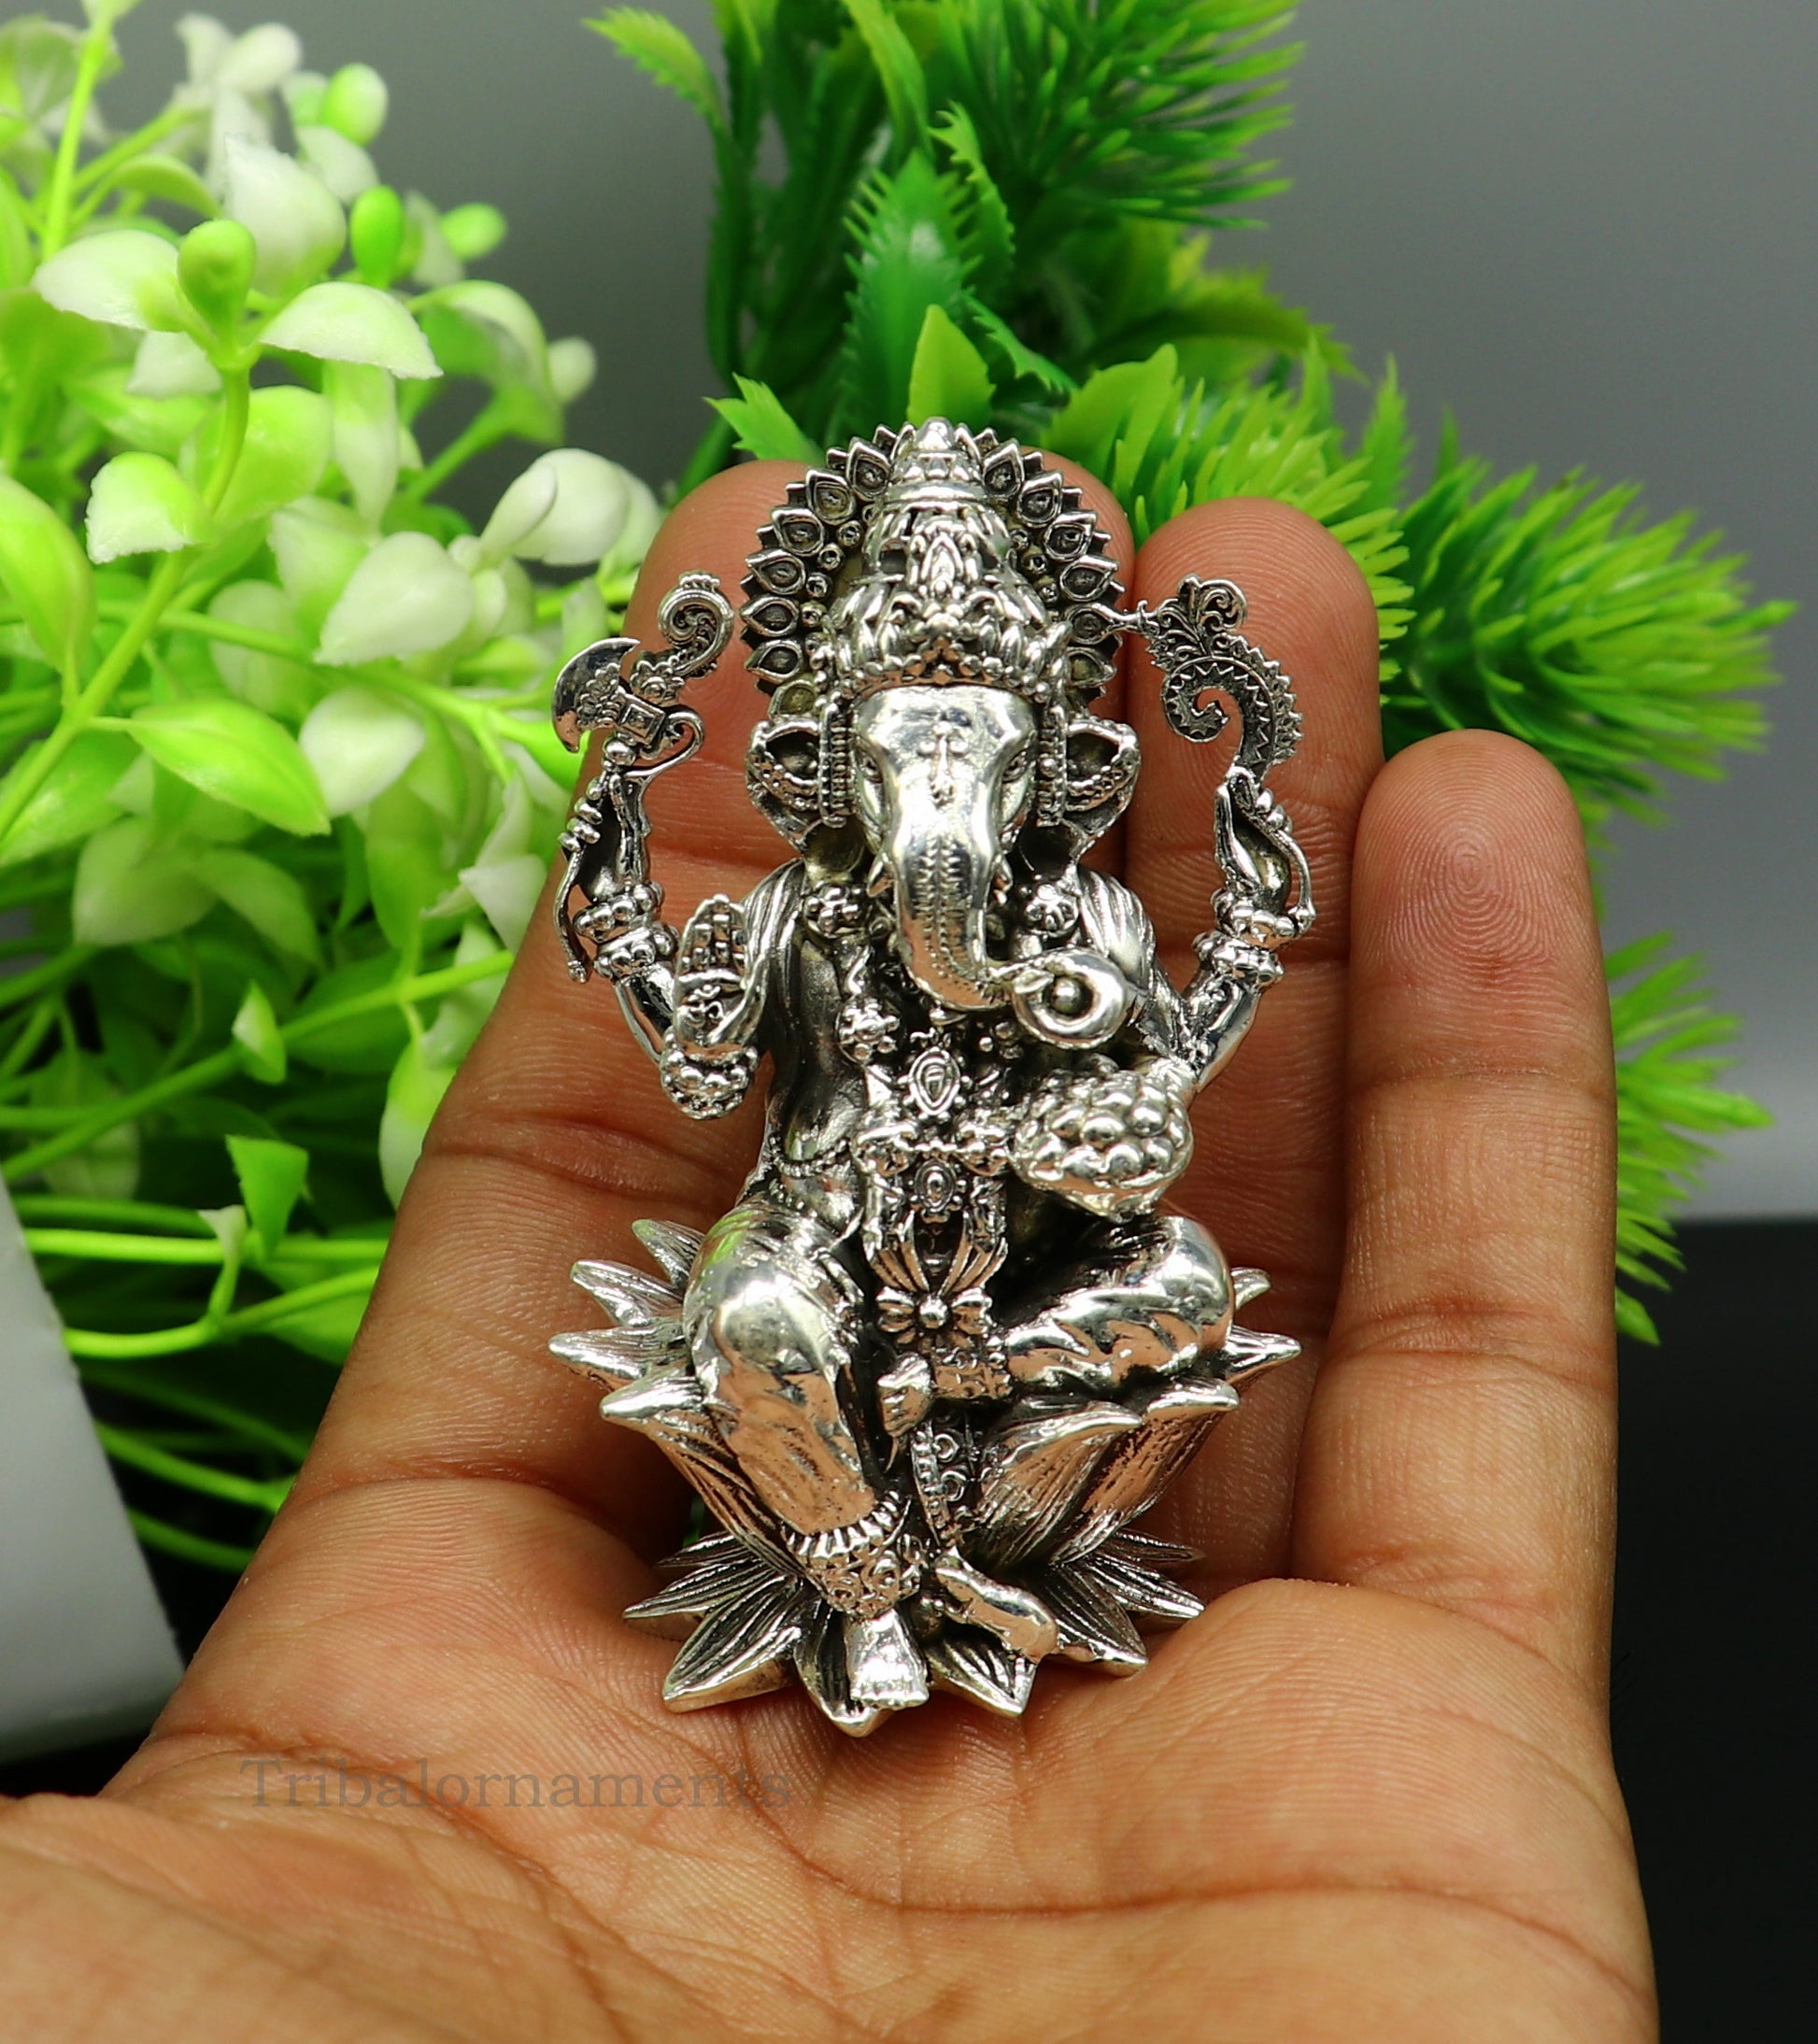 Combo Laxmi and Ganesha 925 Sterling silver handmade customized Hindu idols statue, puja article figurine, home décor puja Articles art27 - TRIBAL ORNAMENTS